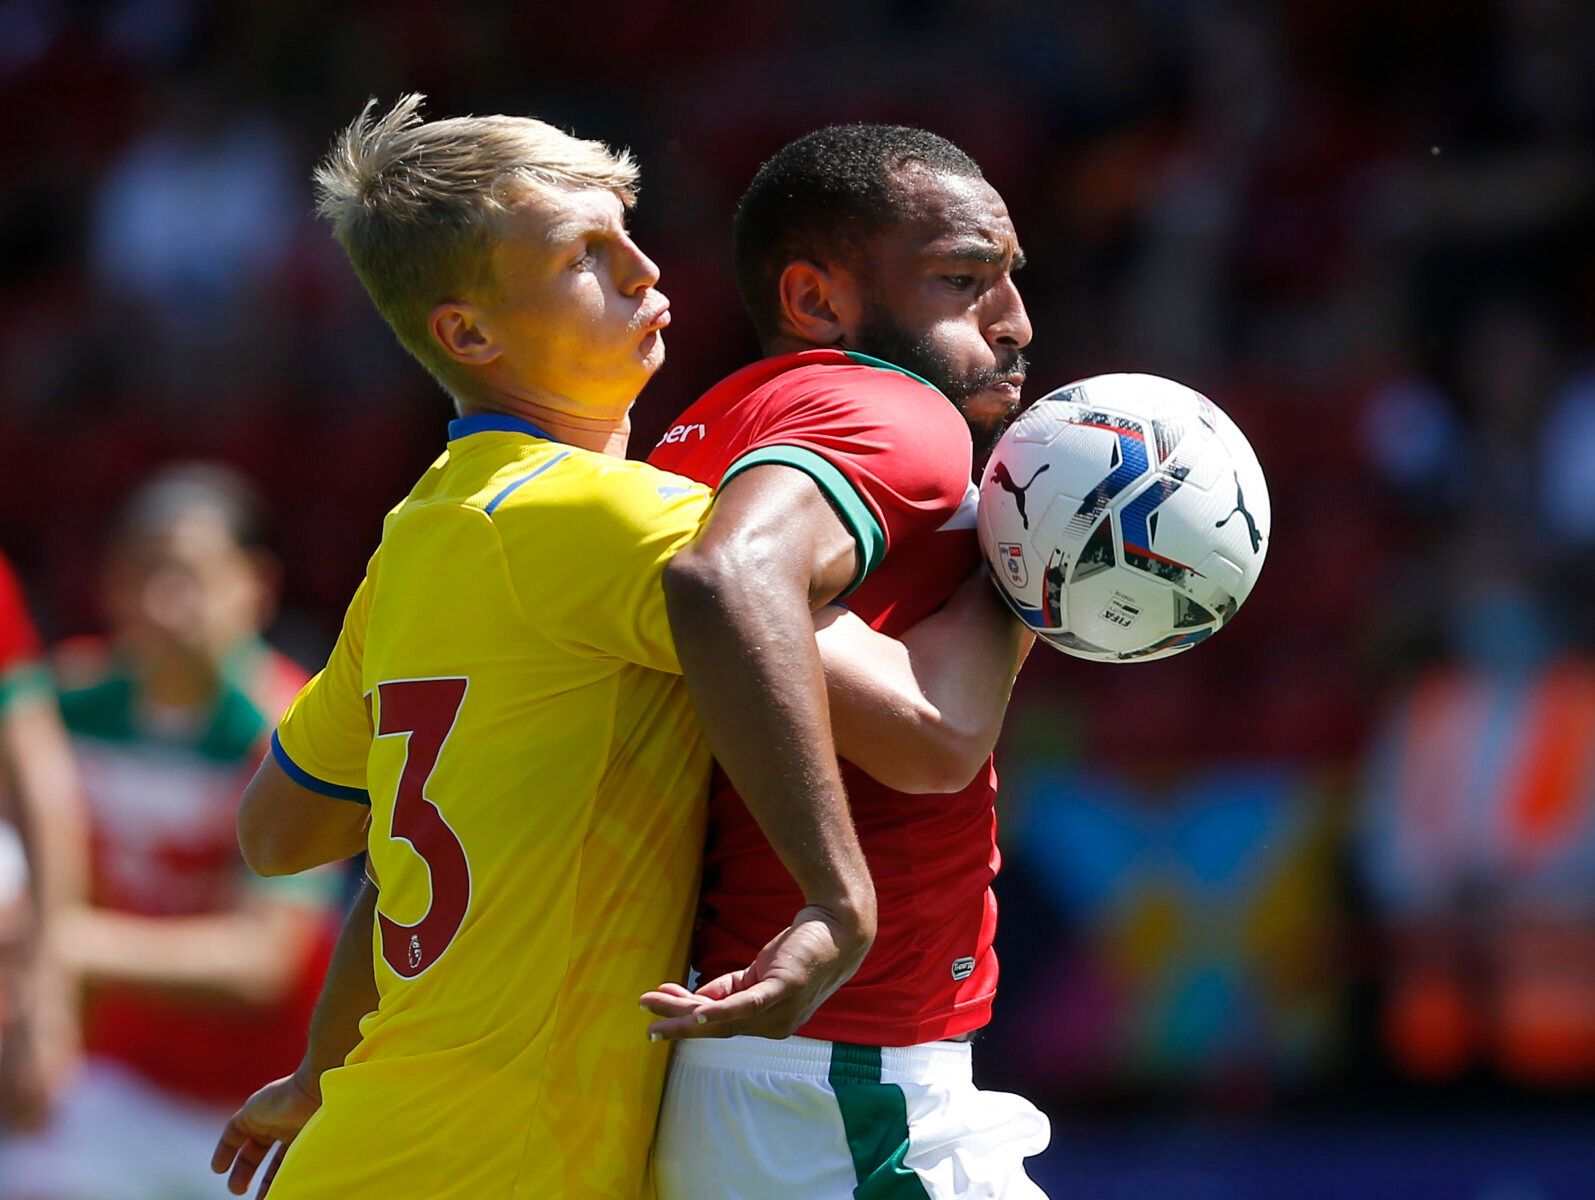 Soccer Football - Pre Season Friendly - Walsall v Crystal Palace - The Banks's Stadium, Walsall, Britain - July 17, 2021 Crystal Palace's Aidan Steele in action with Walsall's Brendan Kiernan Action Images via Reuters/Craig Brough